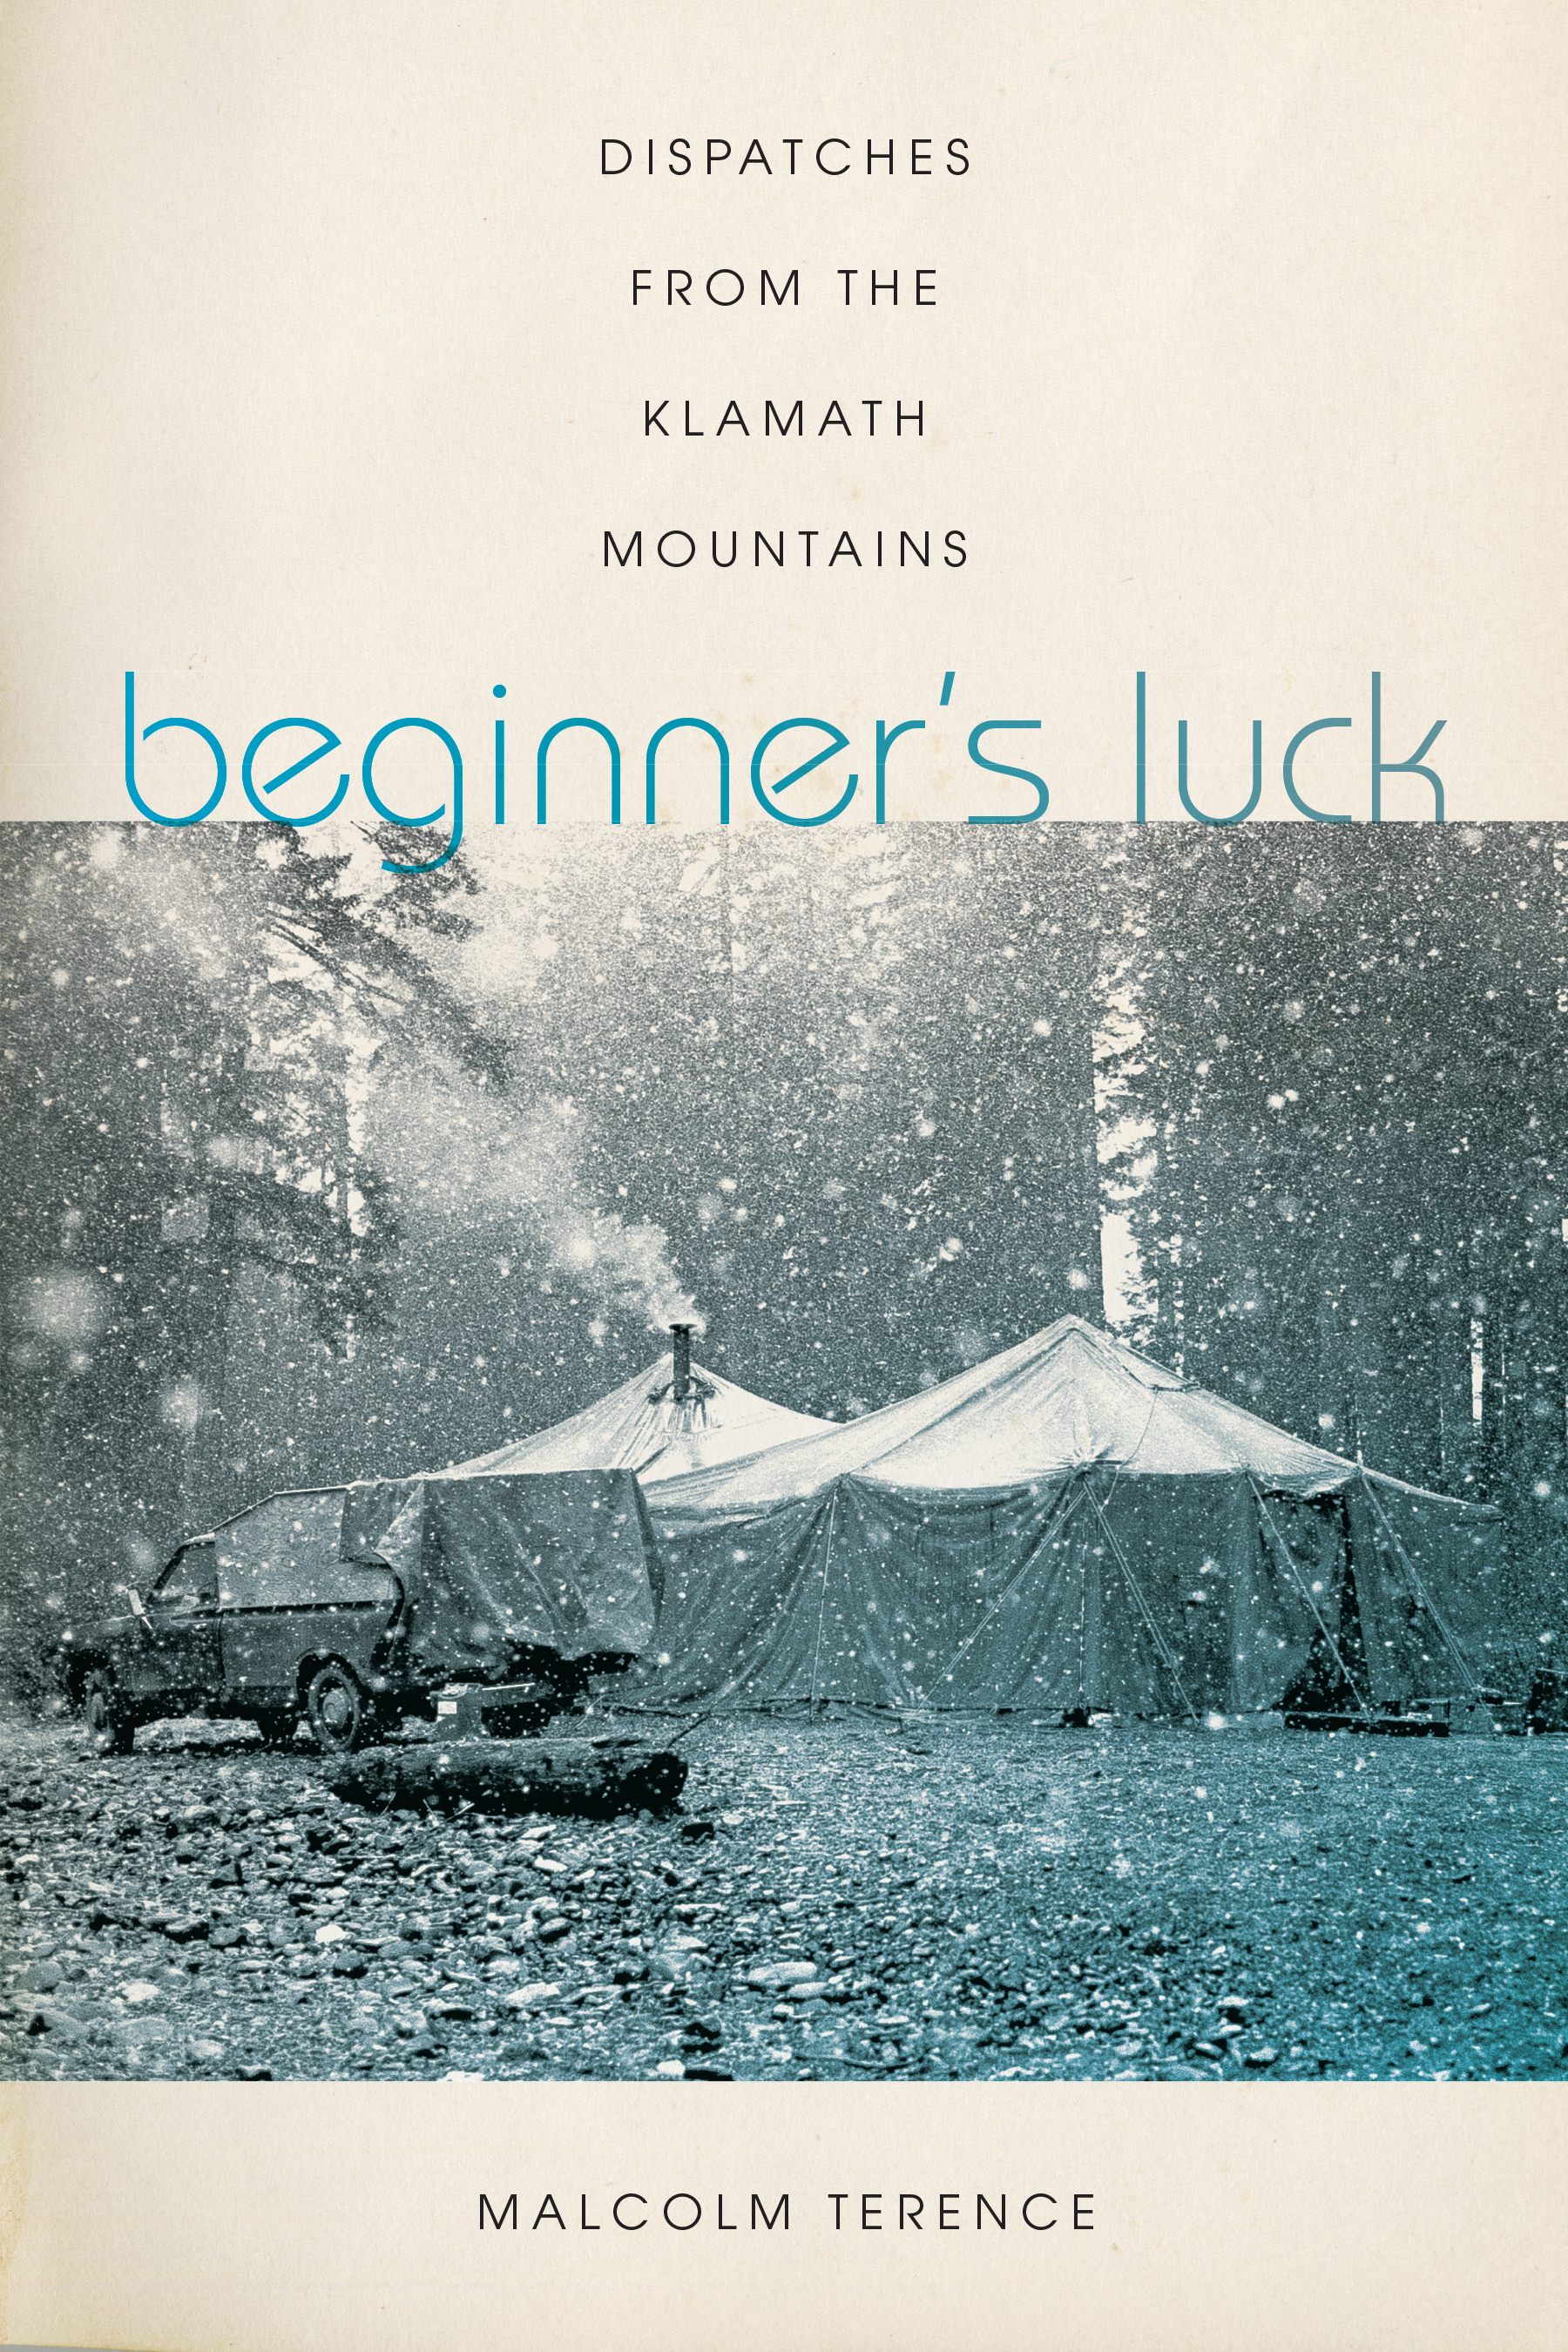 "Beginner's Luck: Dispatches from the Klamath Mountains" by Malcolm Terence